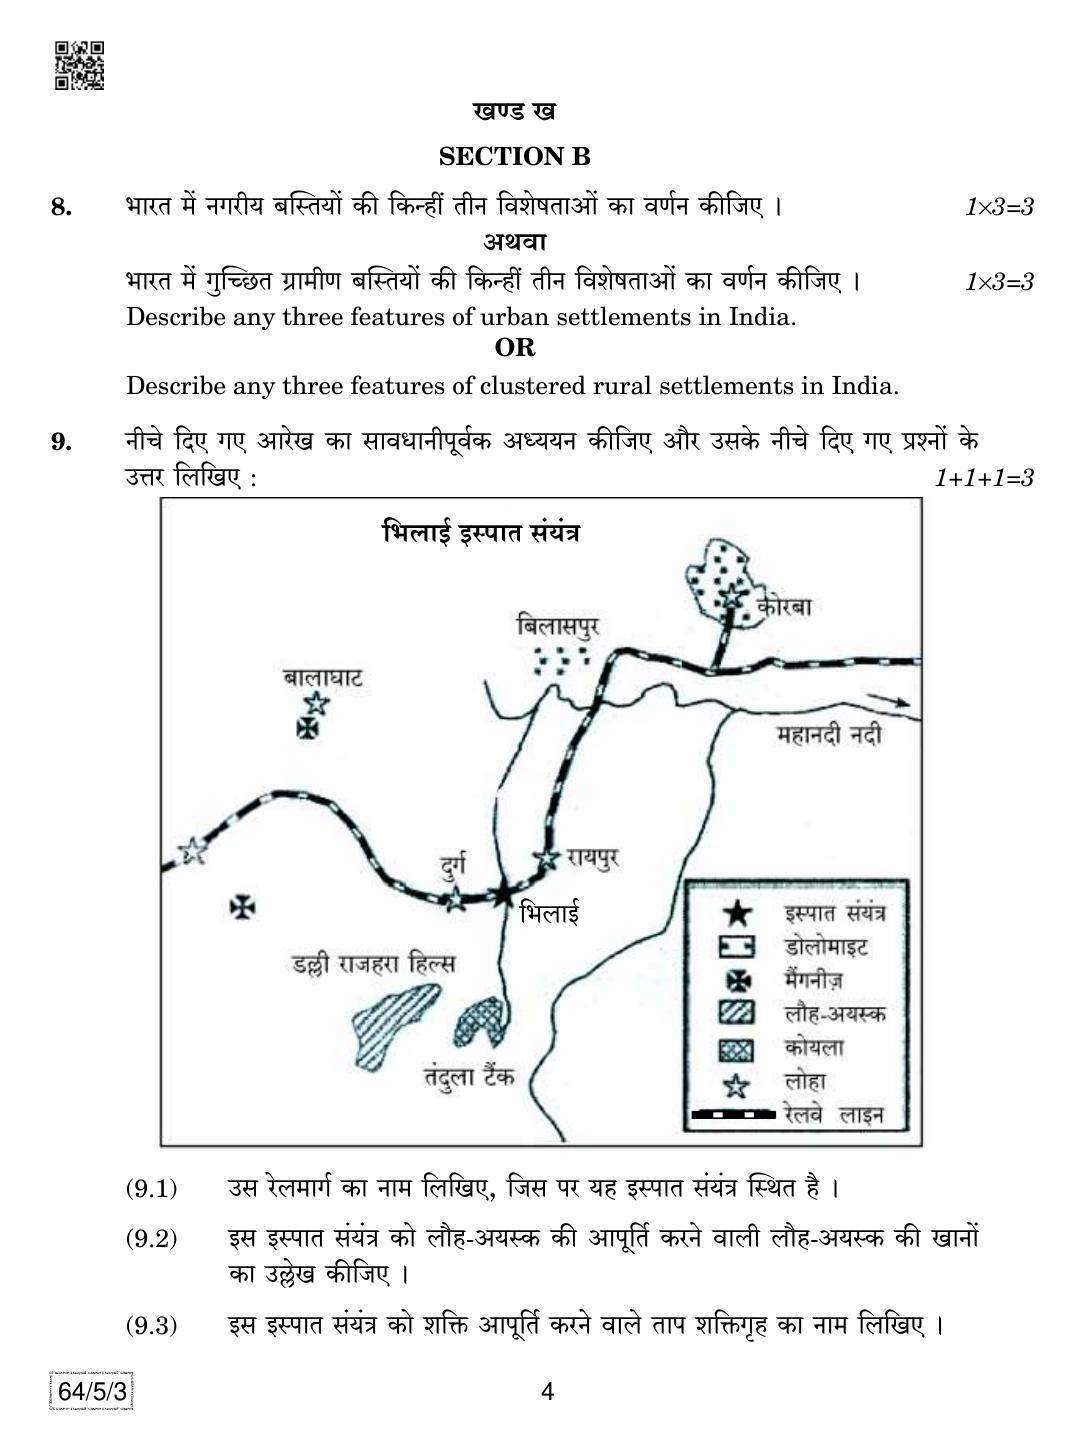 CBSE Class 12 64-5-3 Geography 2019 Question Paper - Page 4